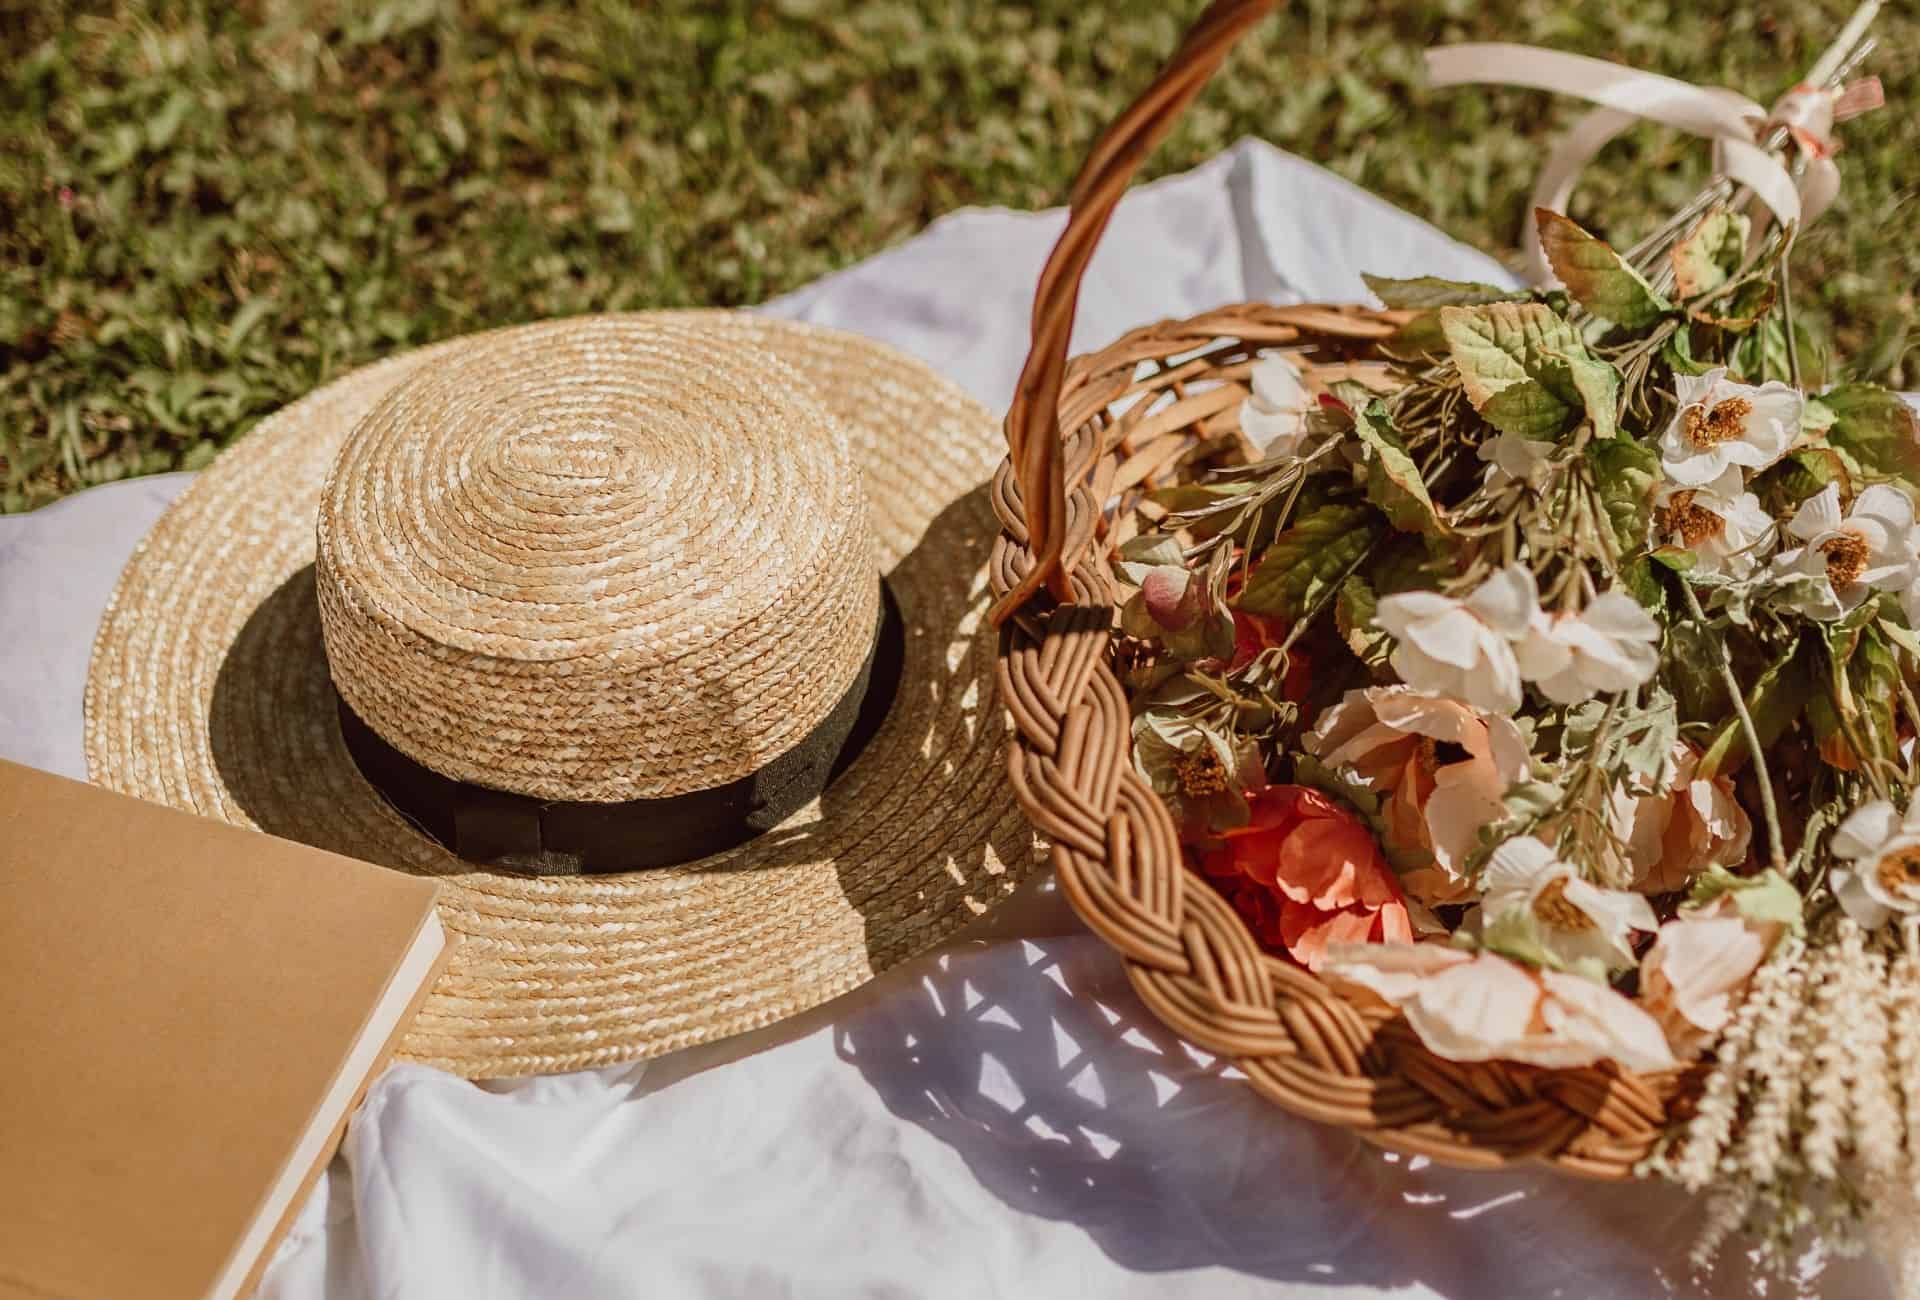 Flowers and a straw hat lying on a picnic blanket.